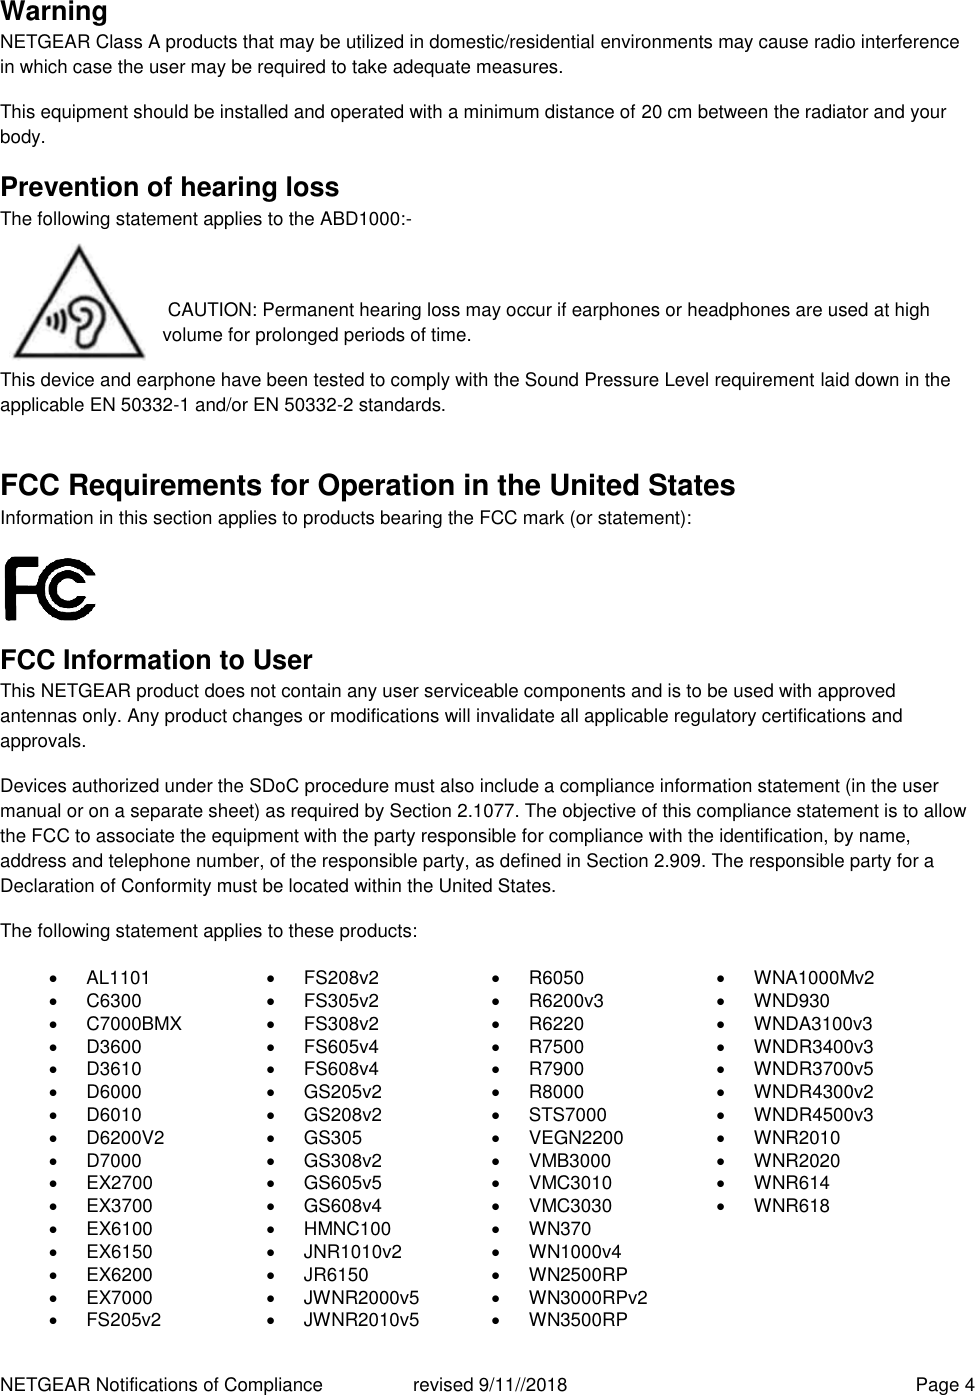 NETGEAR Notifications of Compliance    revised 9/11//2018  Page 4 Warning NETGEAR Class A products that may be utilized in domestic/residential environments may cause radio interference in which case the user may be required to take adequate measures.  This equipment should be installed and operated with a minimum distance of 20 cm between the radiator and your body. Prevention of hearing loss The following statement applies to the ABD1000:-   CAUTION: Permanent hearing loss may occur if earphones or headphones are used at high volume for prolonged periods of time. This device and earphone have been tested to comply with the Sound Pressure Level requirement laid down in the applicable EN 50332-1 and/or EN 50332-2 standards. FCC Requirements for Operation in the United States Information in this section applies to products bearing the FCC mark (or statement):   FCC Information to User This NETGEAR product does not contain any user serviceable components and is to be used with approved antennas only. Any product changes or modifications will invalidate all applicable regulatory certifications and approvals. Devices authorized under the SDoC procedure must also include a compliance information statement (in the user manual or on a separate sheet) as required by Section 2.1077. The objective of this compliance statement is to allow the FCC to associate the equipment with the party responsible for compliance with the identification, by name, address and telephone number, of the responsible party, as defined in Section 2.909. The responsible party for a Declaration of Conformity must be located within the United States. The following statement applies to these products:   AL1101   FS208v2   R6050   WNA1000Mv2   C6300   FS305v2   R6200v3   WND930   C7000BMX   FS308v2   R6220  WNDA3100v3   D3600   FS605v4   R7500   WNDR3400v3   D3610   FS608v4   R7900   WNDR3700v5   D6000   GS205v2   R8000   WNDR4300v2   D6010   GS208v2   STS7000   WNDR4500v3   D6200V2   GS305   VEGN2200   WNR2010   D7000   GS308v2   VMB3000   WNR2020  EX2700   GS605v5   VMC3010   WNR614   EX3700   GS608v4   VMC3030   WNR618   EX6100   HMNC100   WN370   EX6150   JNR1010v2  WN1000v4   EX6200   JR6150   WN2500RP   EX7000   JWNR2000v5   WN3000RPv2   FS205v2   JWNR2010v5   WN3500RP 